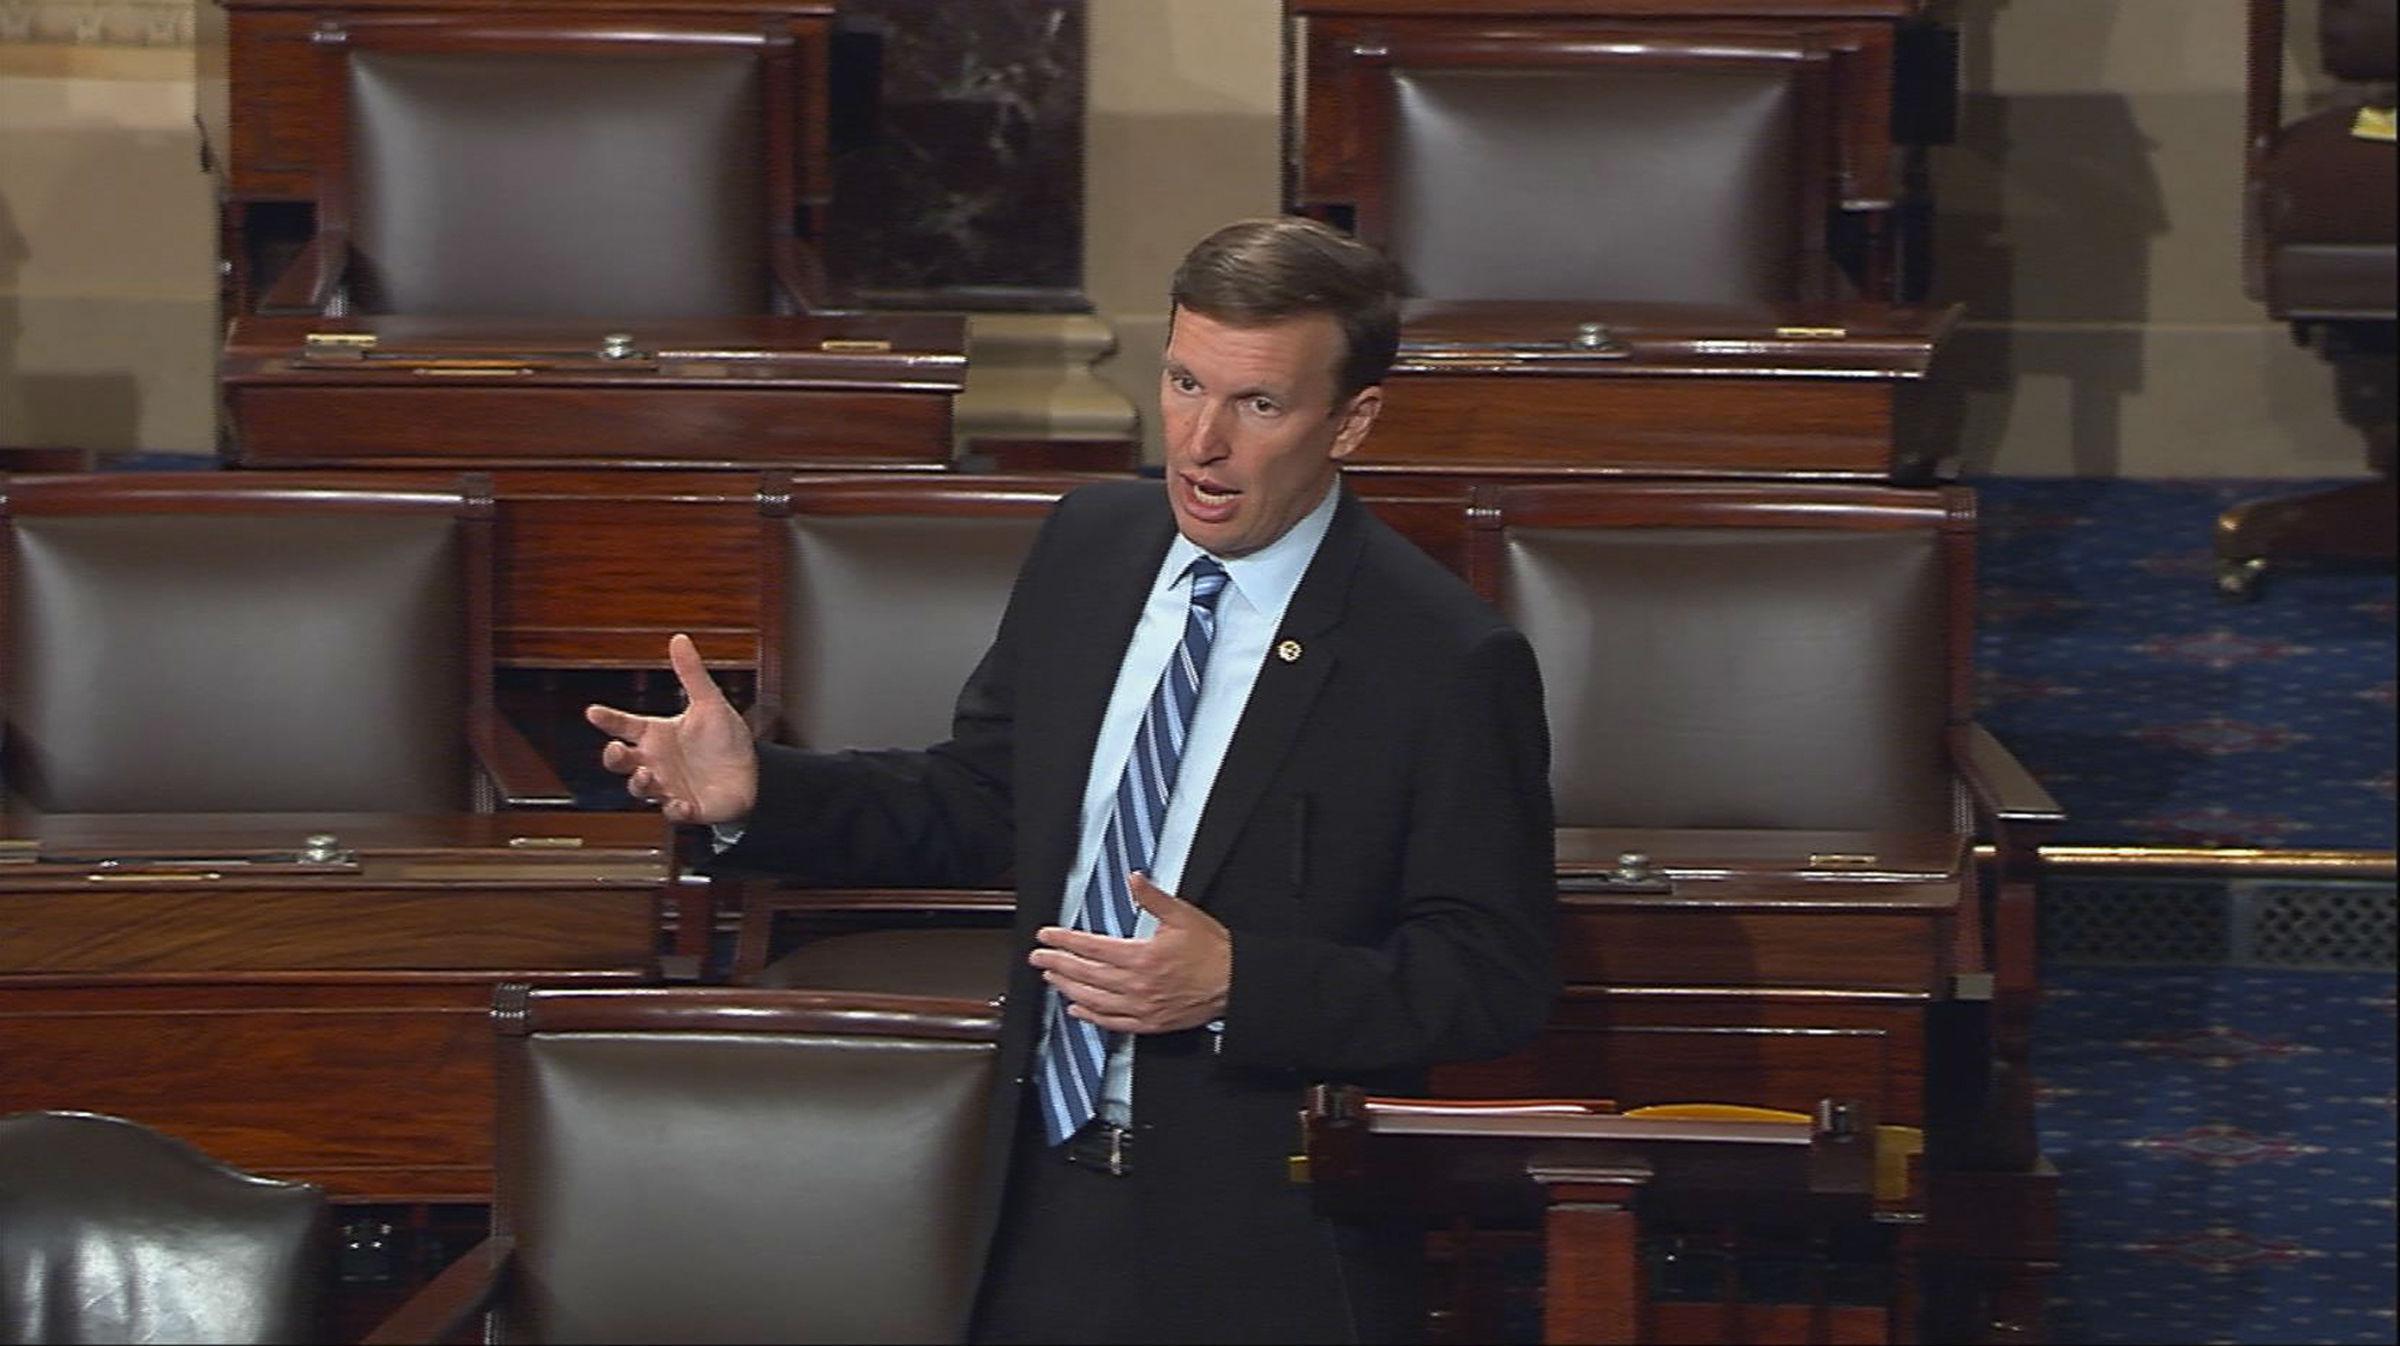 Senator Chris Murphy said politicians had failed to act in the aftermath of the 2012 Newtown shooting in his state